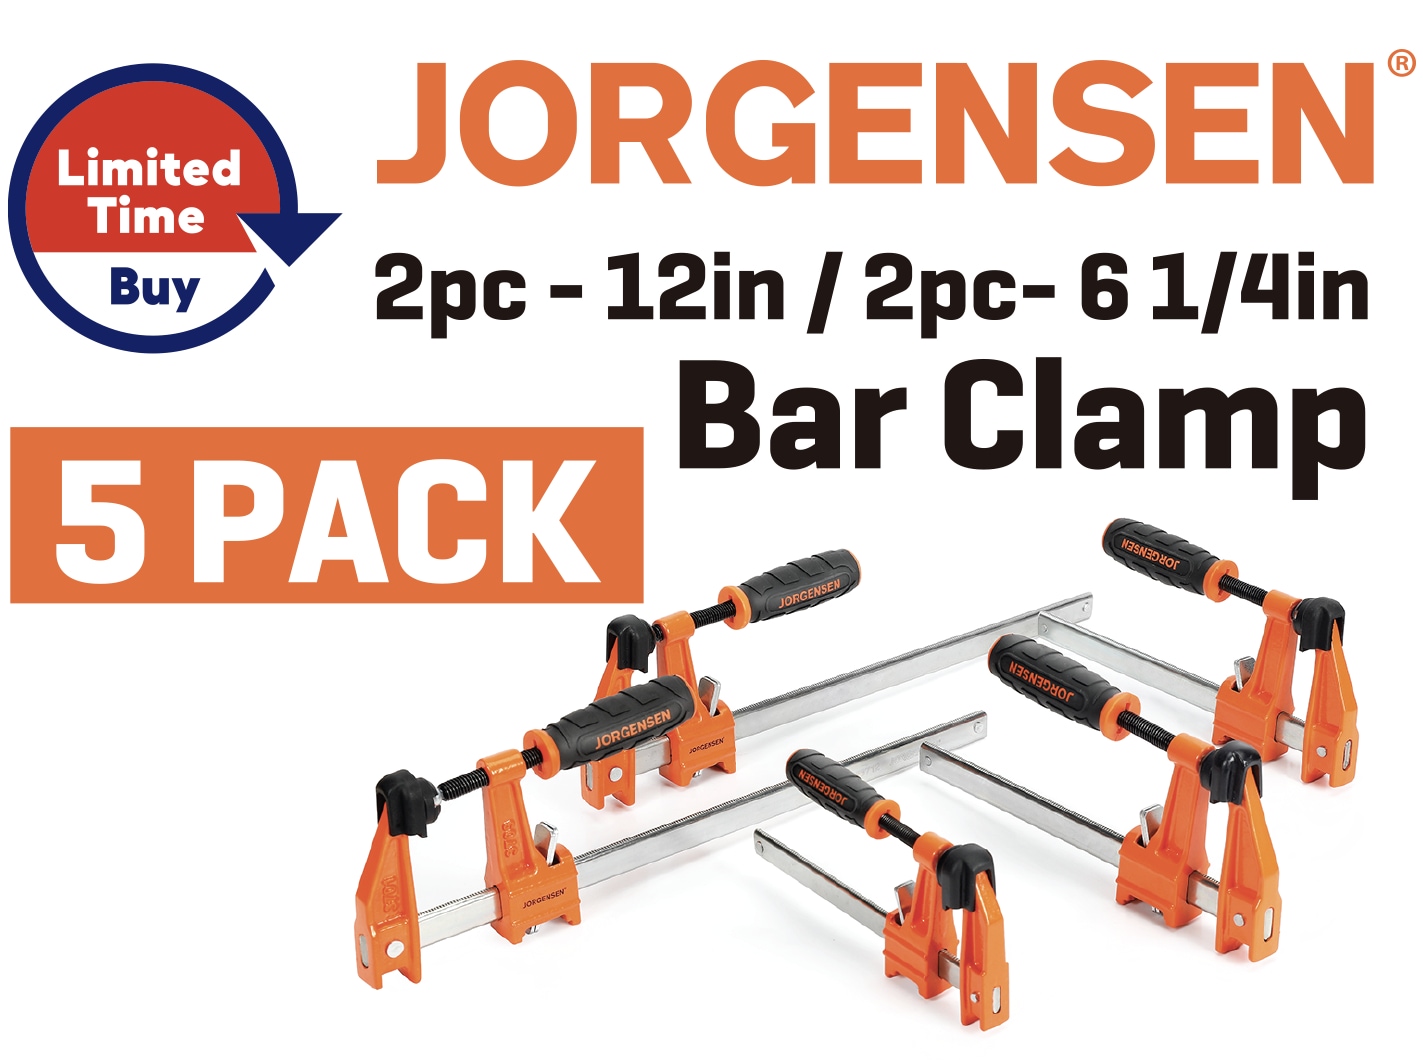 Jorgensen 5-Pack Assorted (2-12in,2-6in,1-4in) Bar Clamp in the